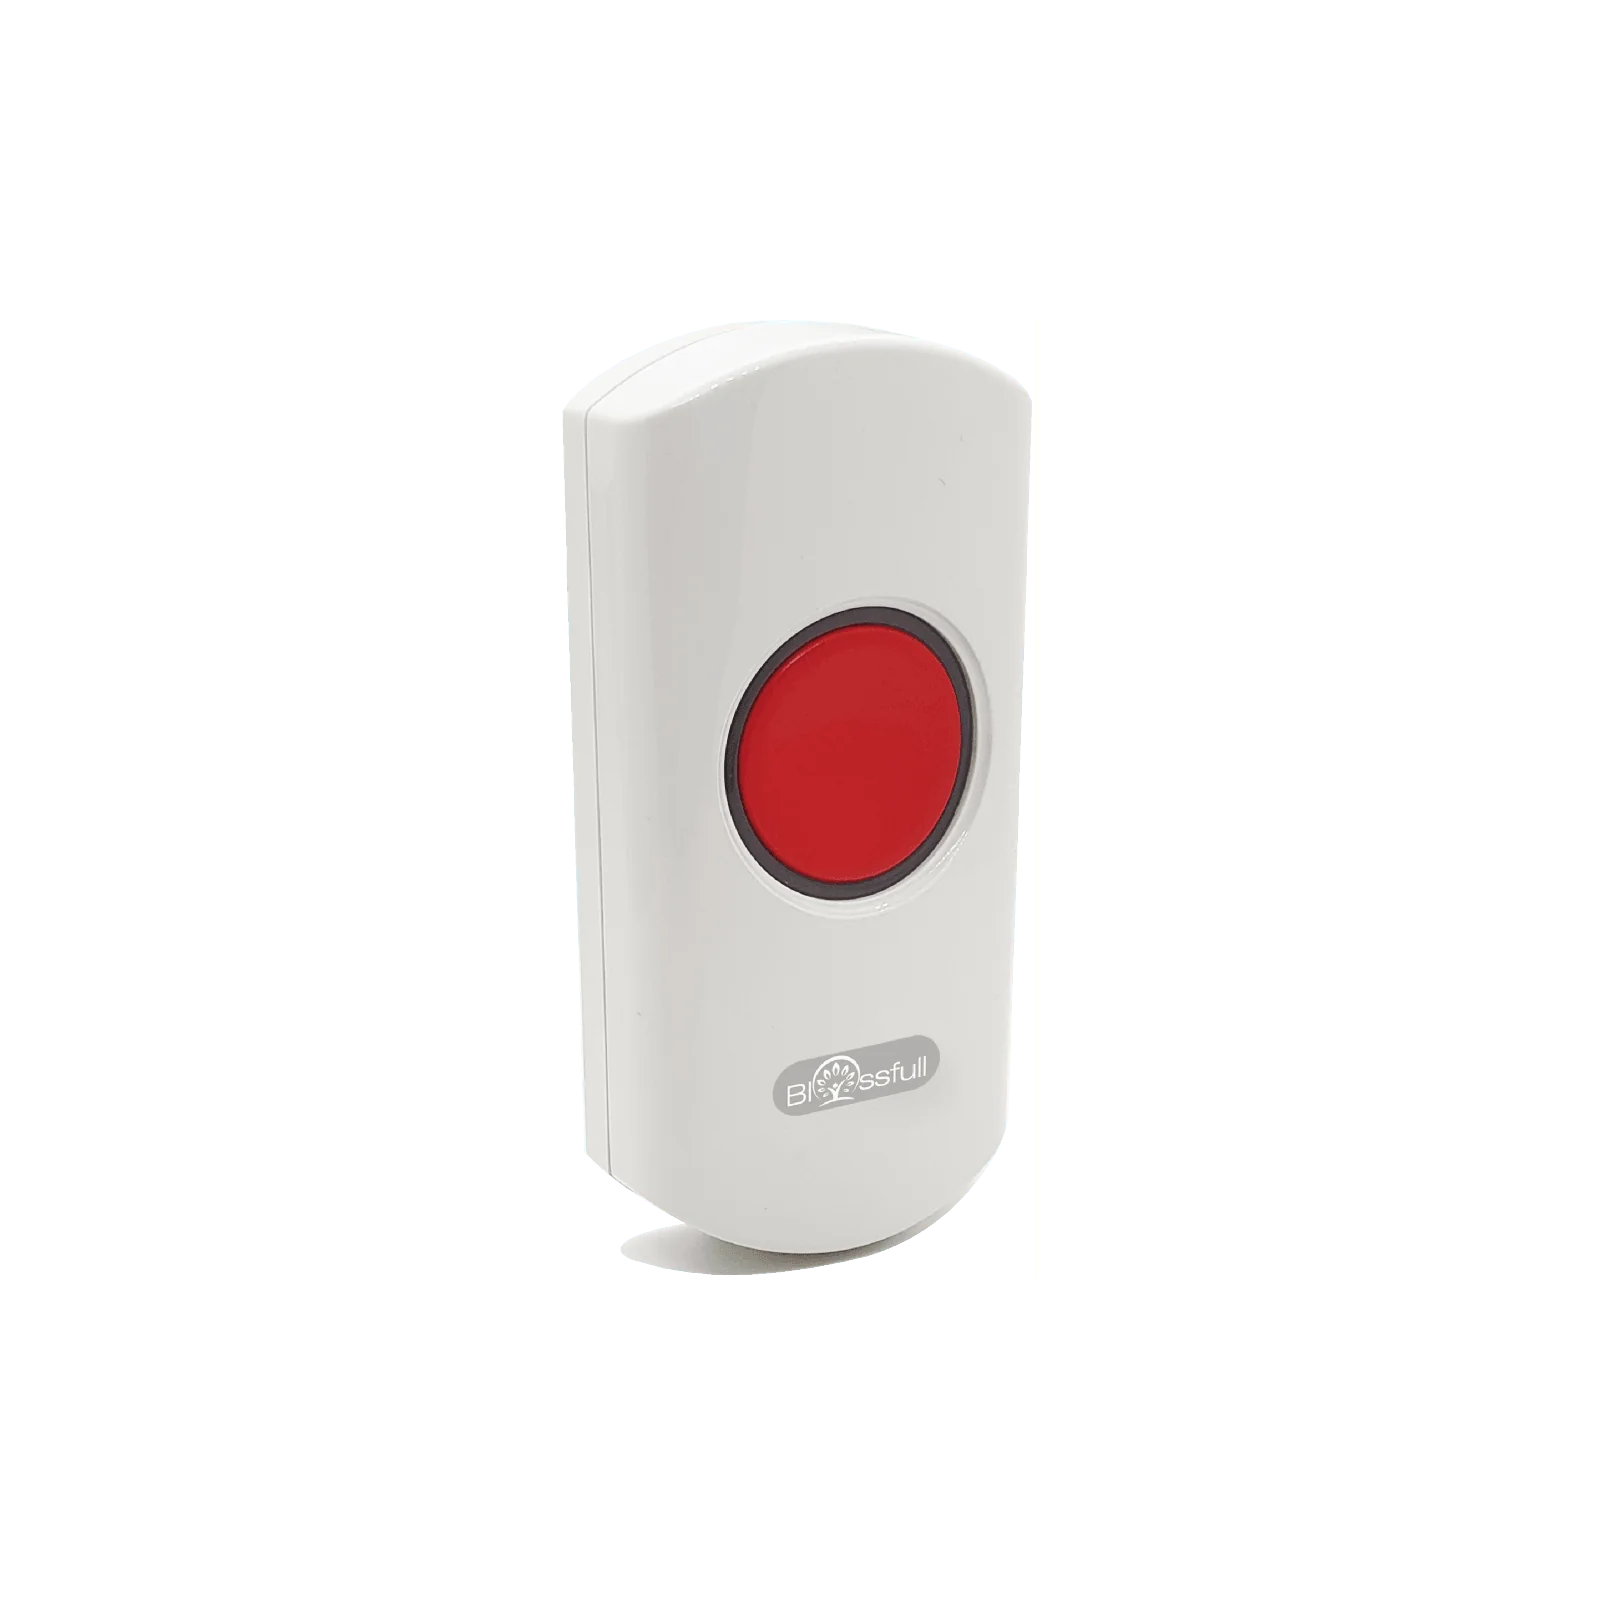 Blissfull Accessories Panic Button (Wall Mounted with Top Cover)